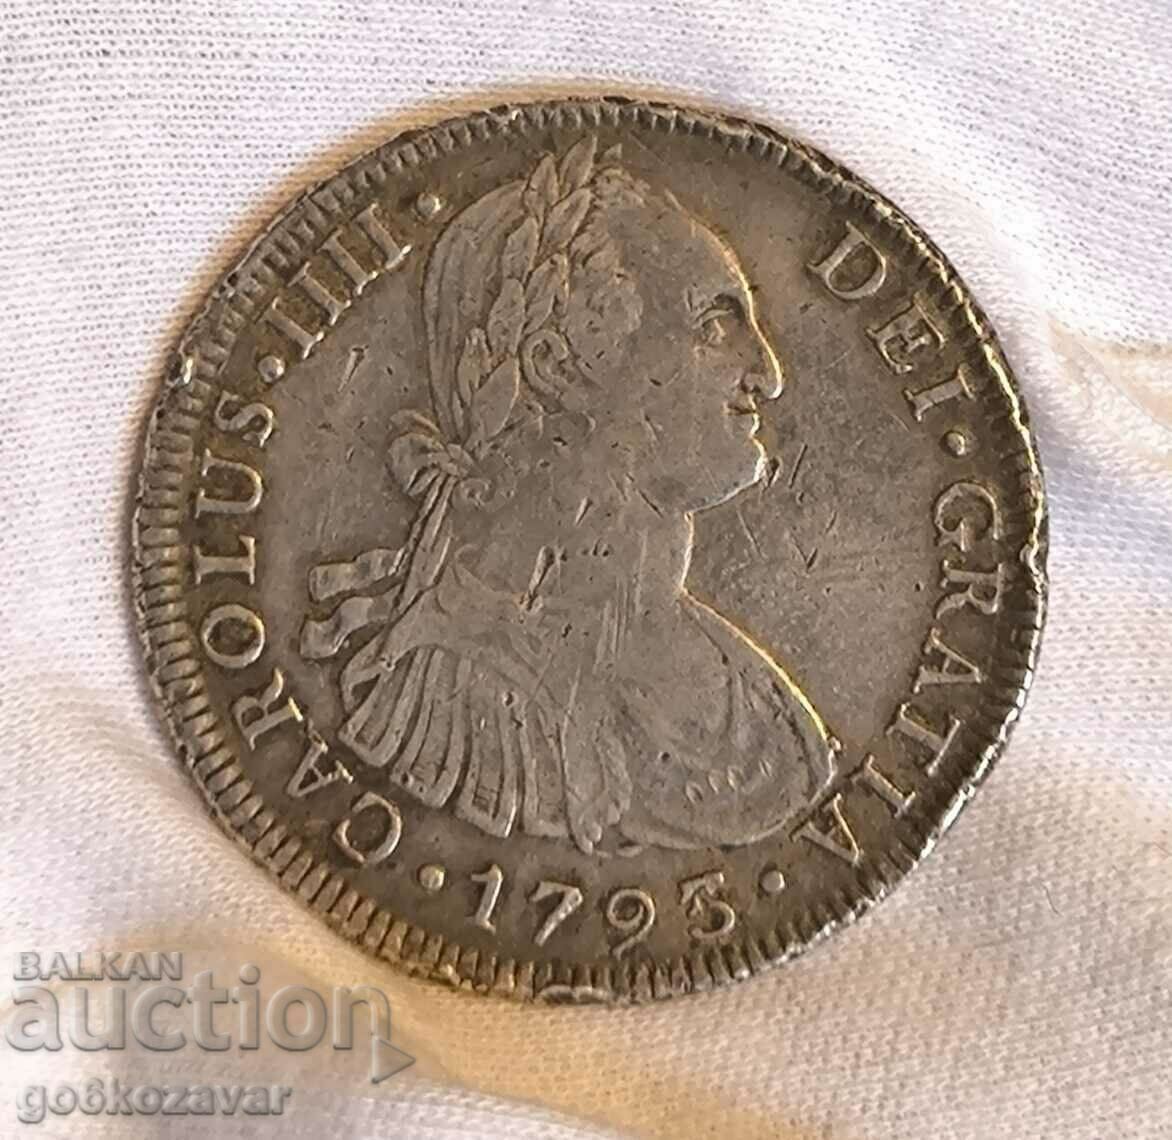 Thaler 8 reales 1793 Silver Spain Colony of Mexico Rare!